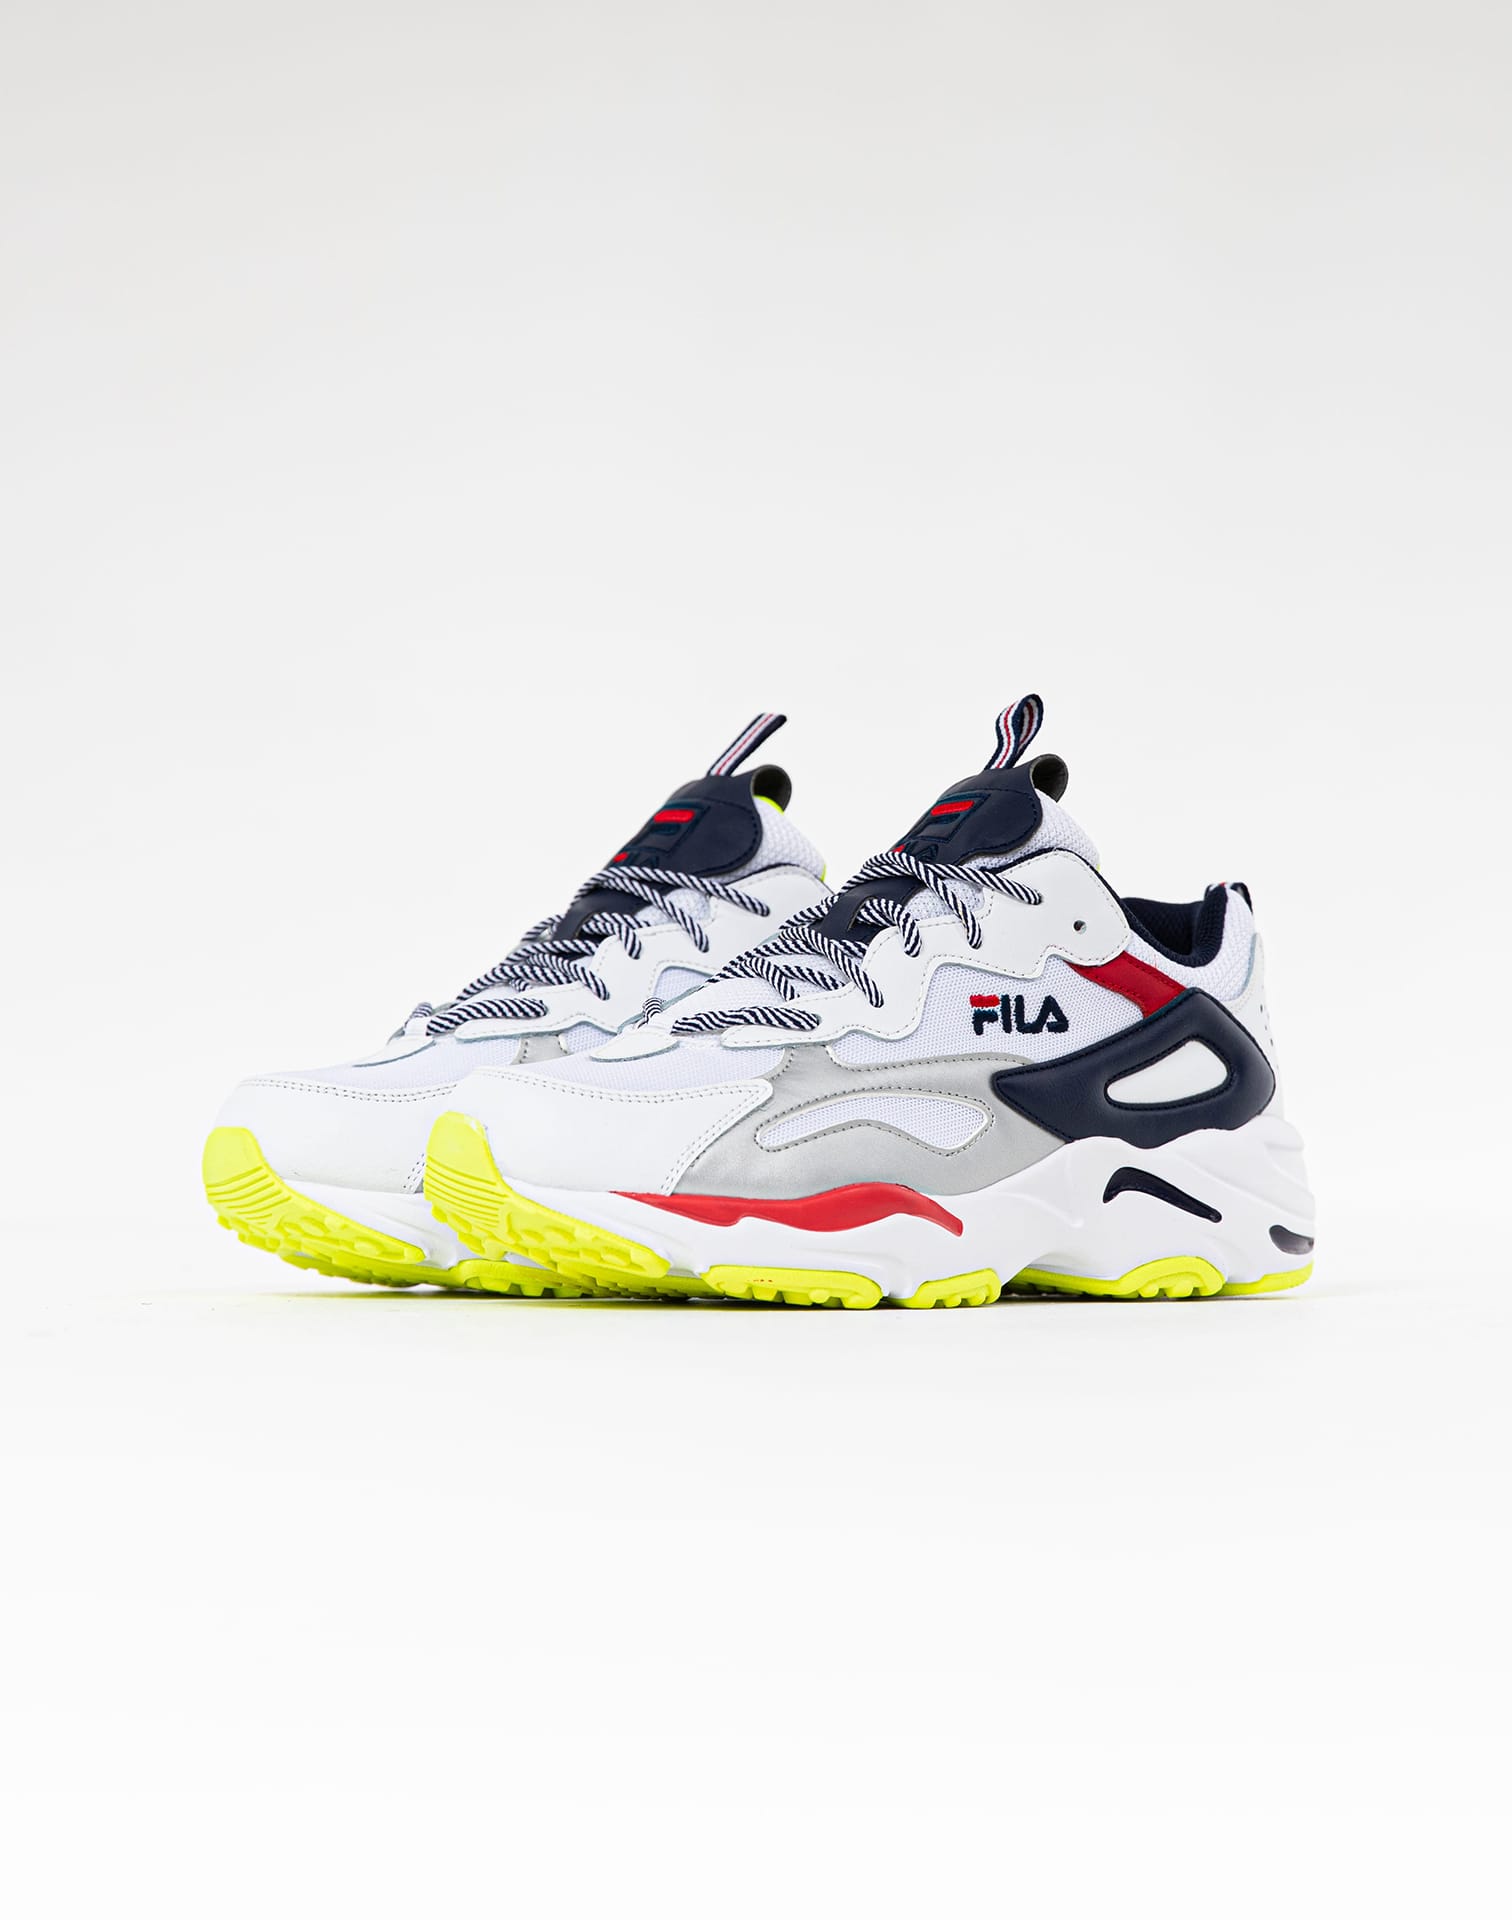 Fila Ray Tracer – DTLR